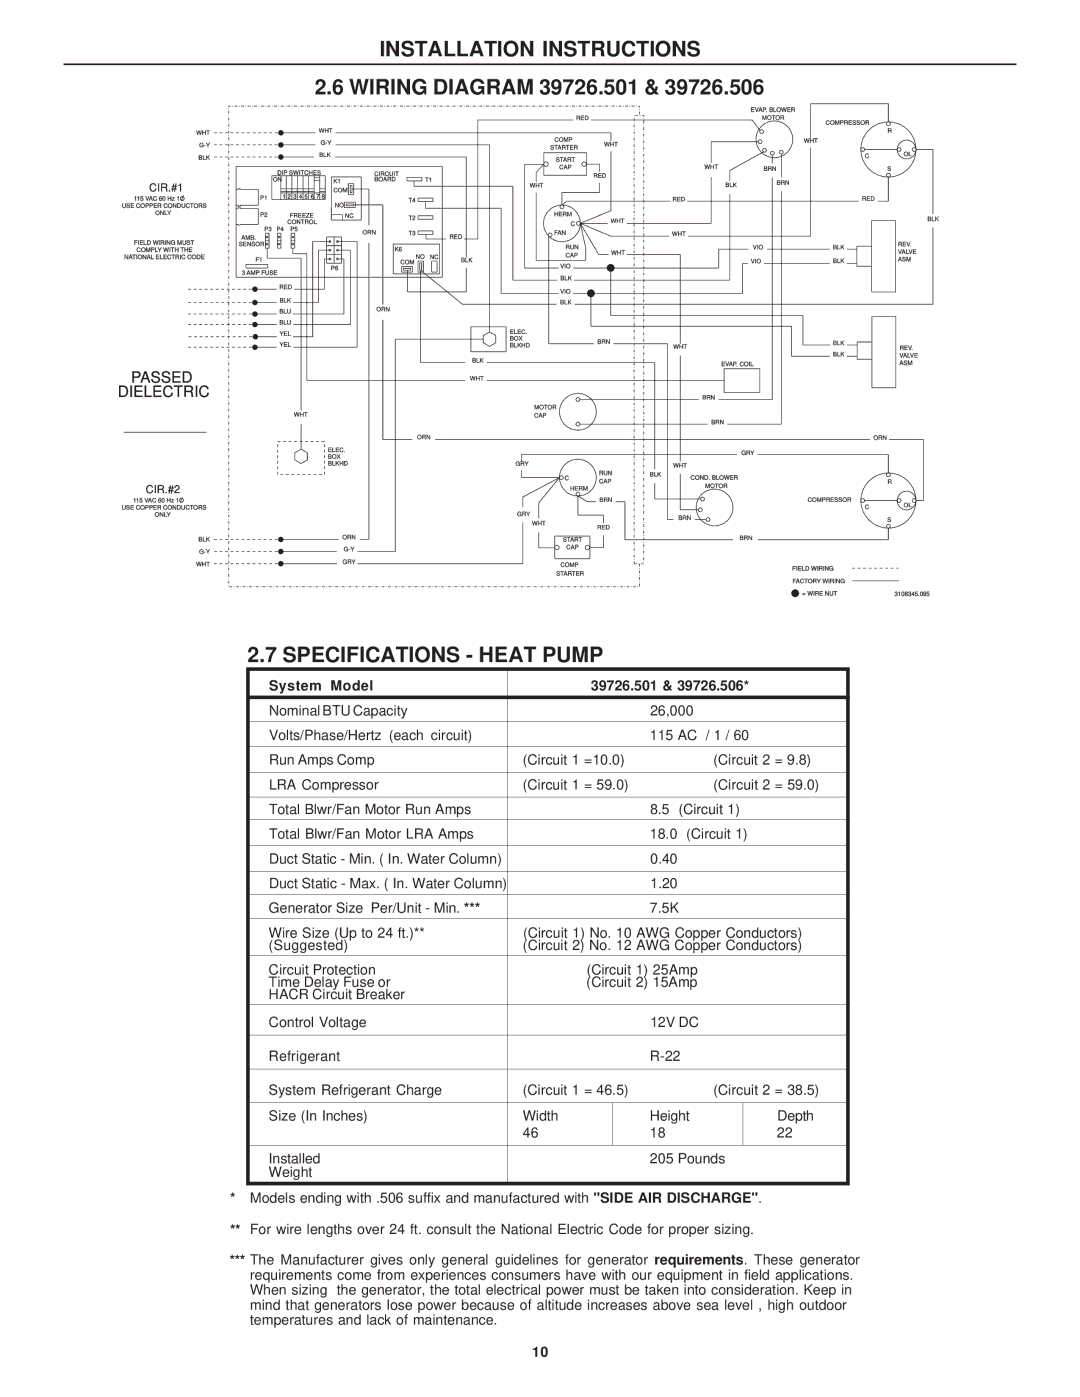 Dometic 39726.501, 39726.506, 39626.501, 39626.506 installation instructions Specifications Heat Pump, Passed Dielectric 